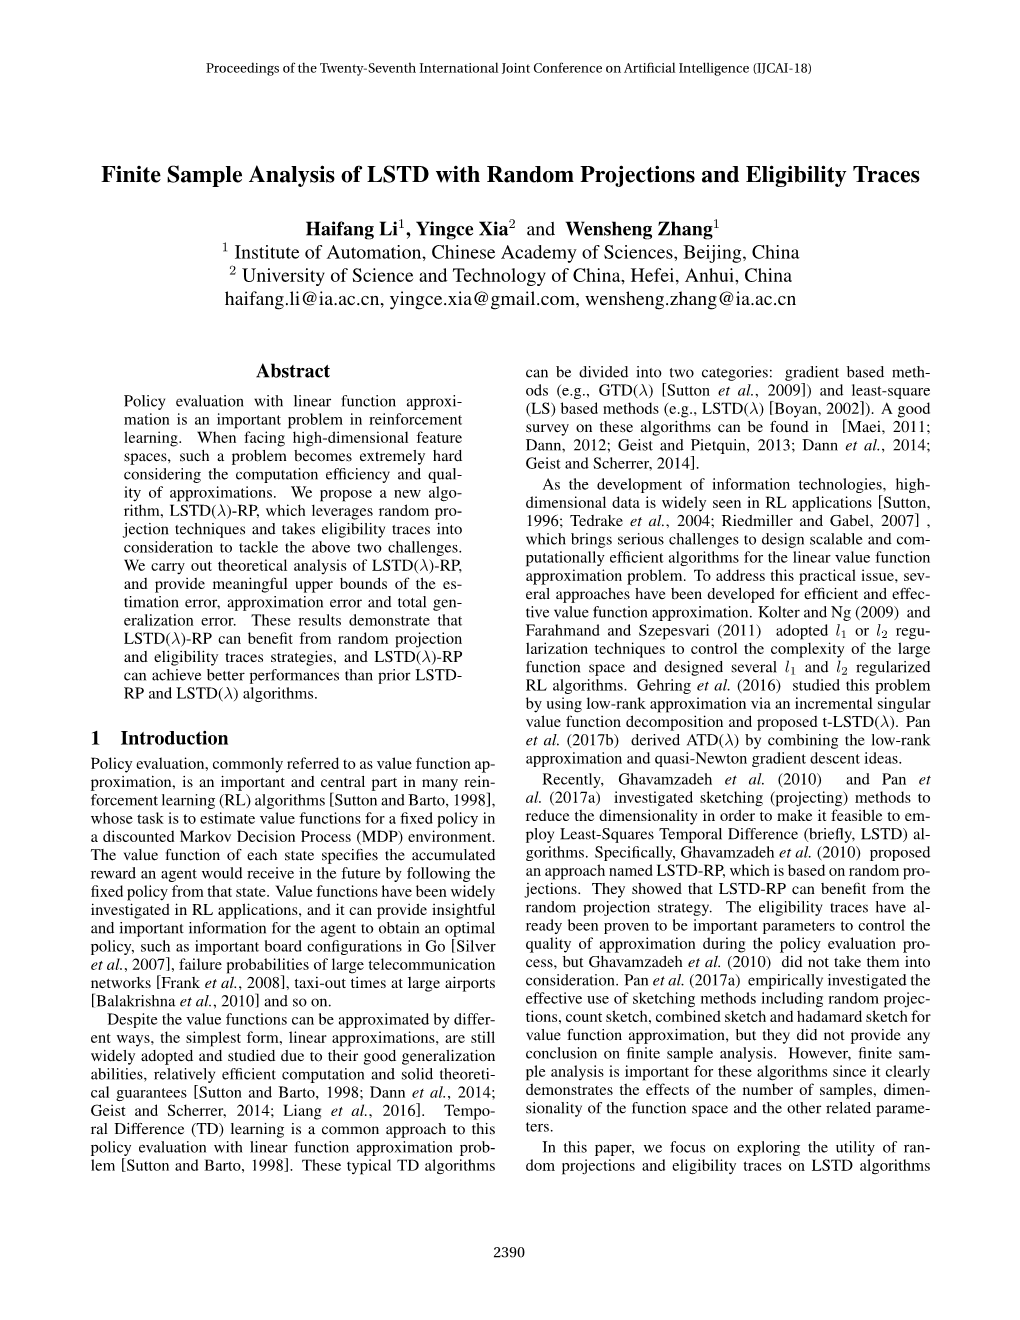 Finite Sample Analysis of LSTD with Random Projections and Eligibility Traces